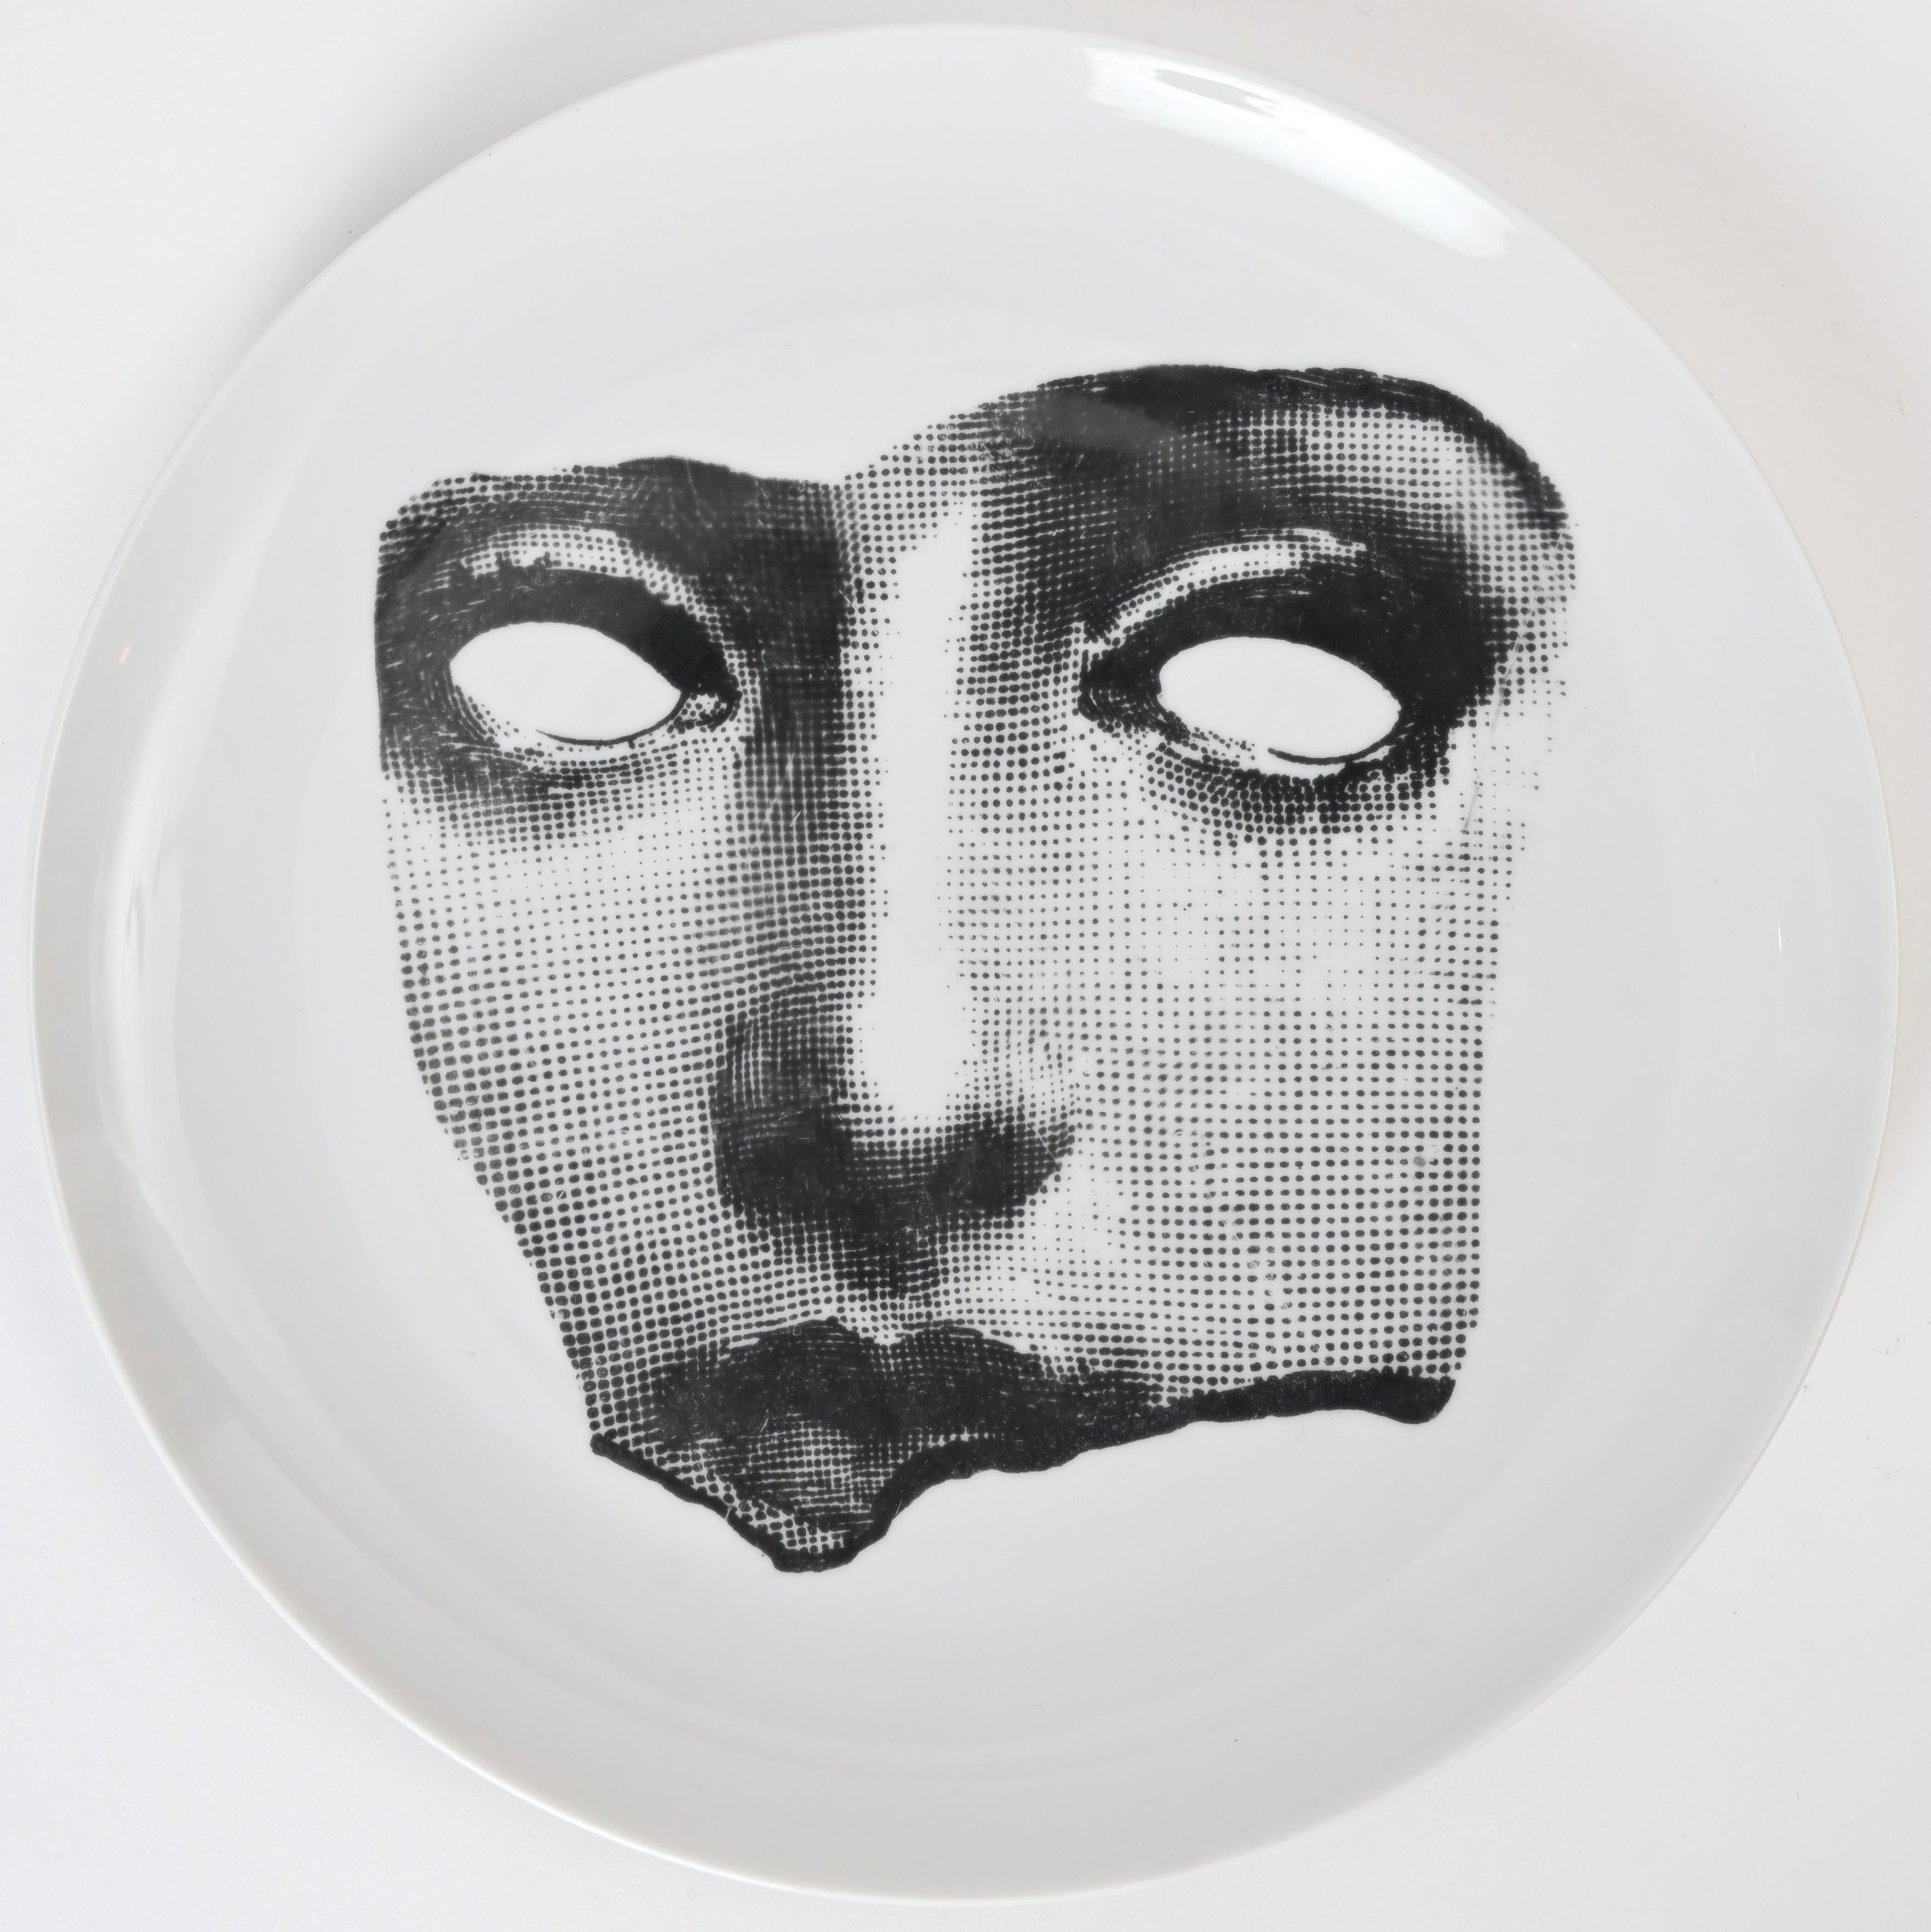 Mid-Century Modern Early Themes and Variations Ceramic Plate #64, Piero Fornasetti Italy circa 1960